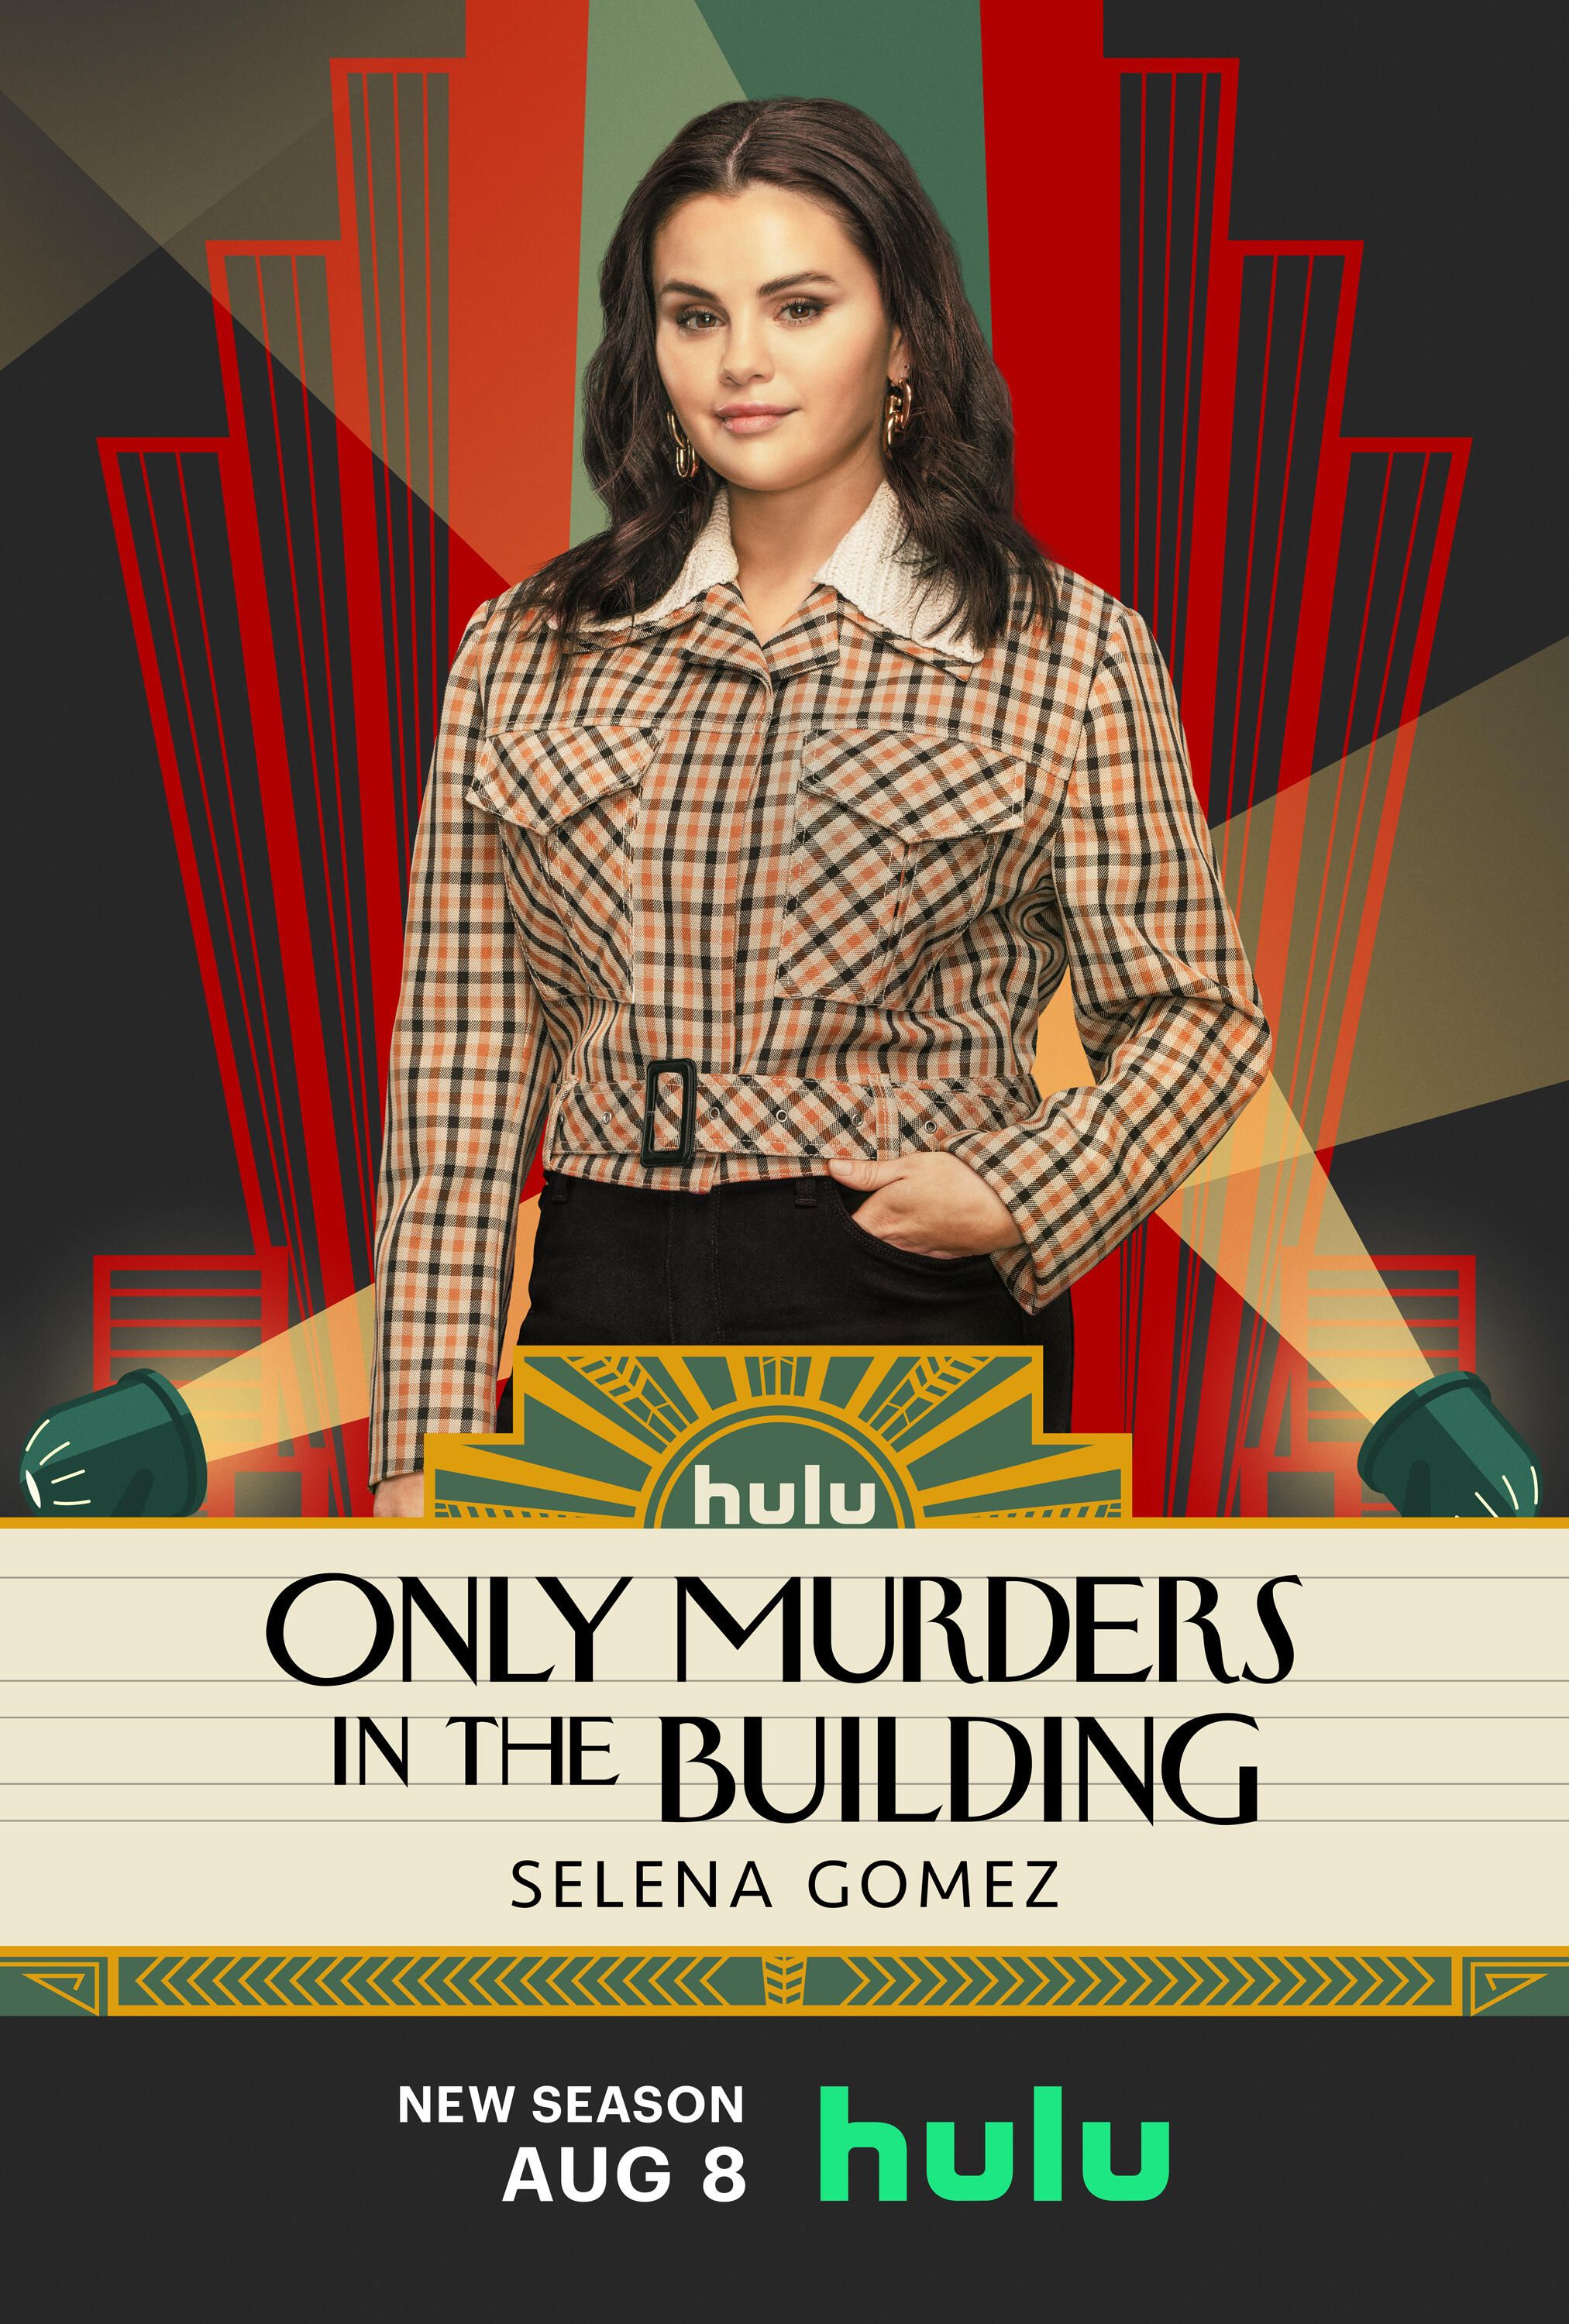 Mabel Mora, Only Murders in the Building Wiki